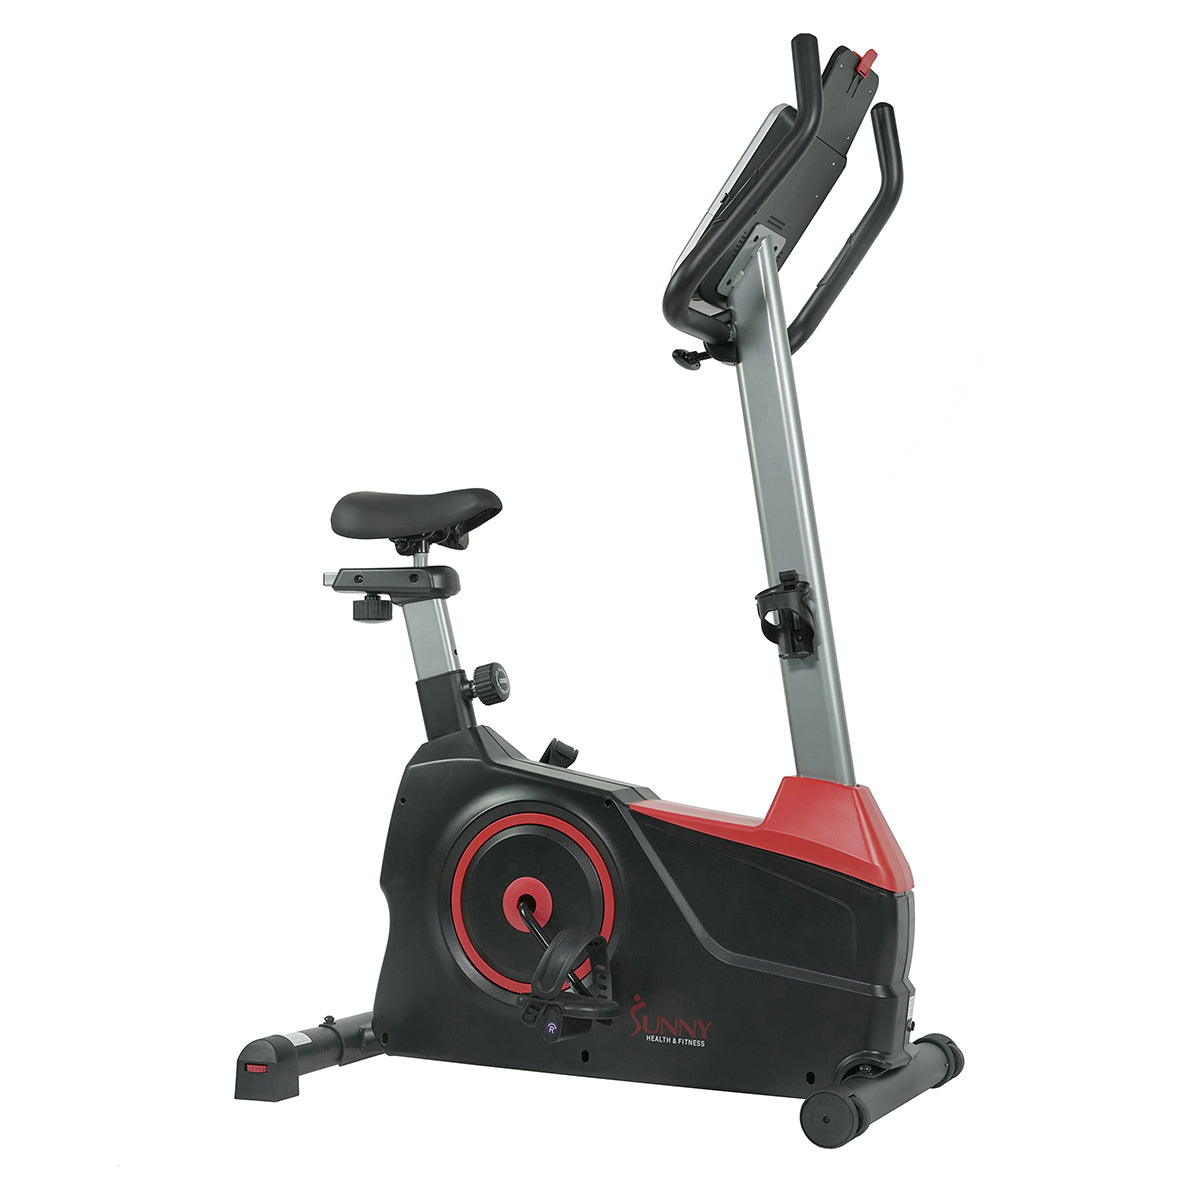 Evo-Fit Stationary Upright Bike with 24 Level Electro-Magnetic Resistance